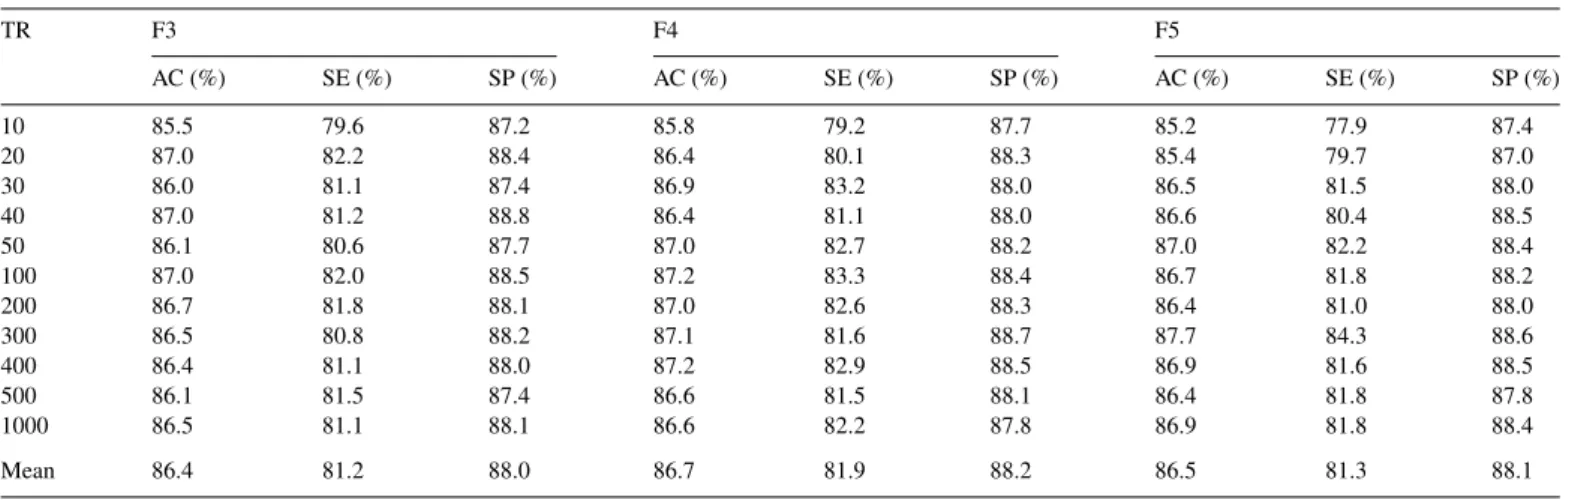 Table 7 shows the results based on three feature sets with various TR values. It reveals the performance among three sets is great but not significantly different